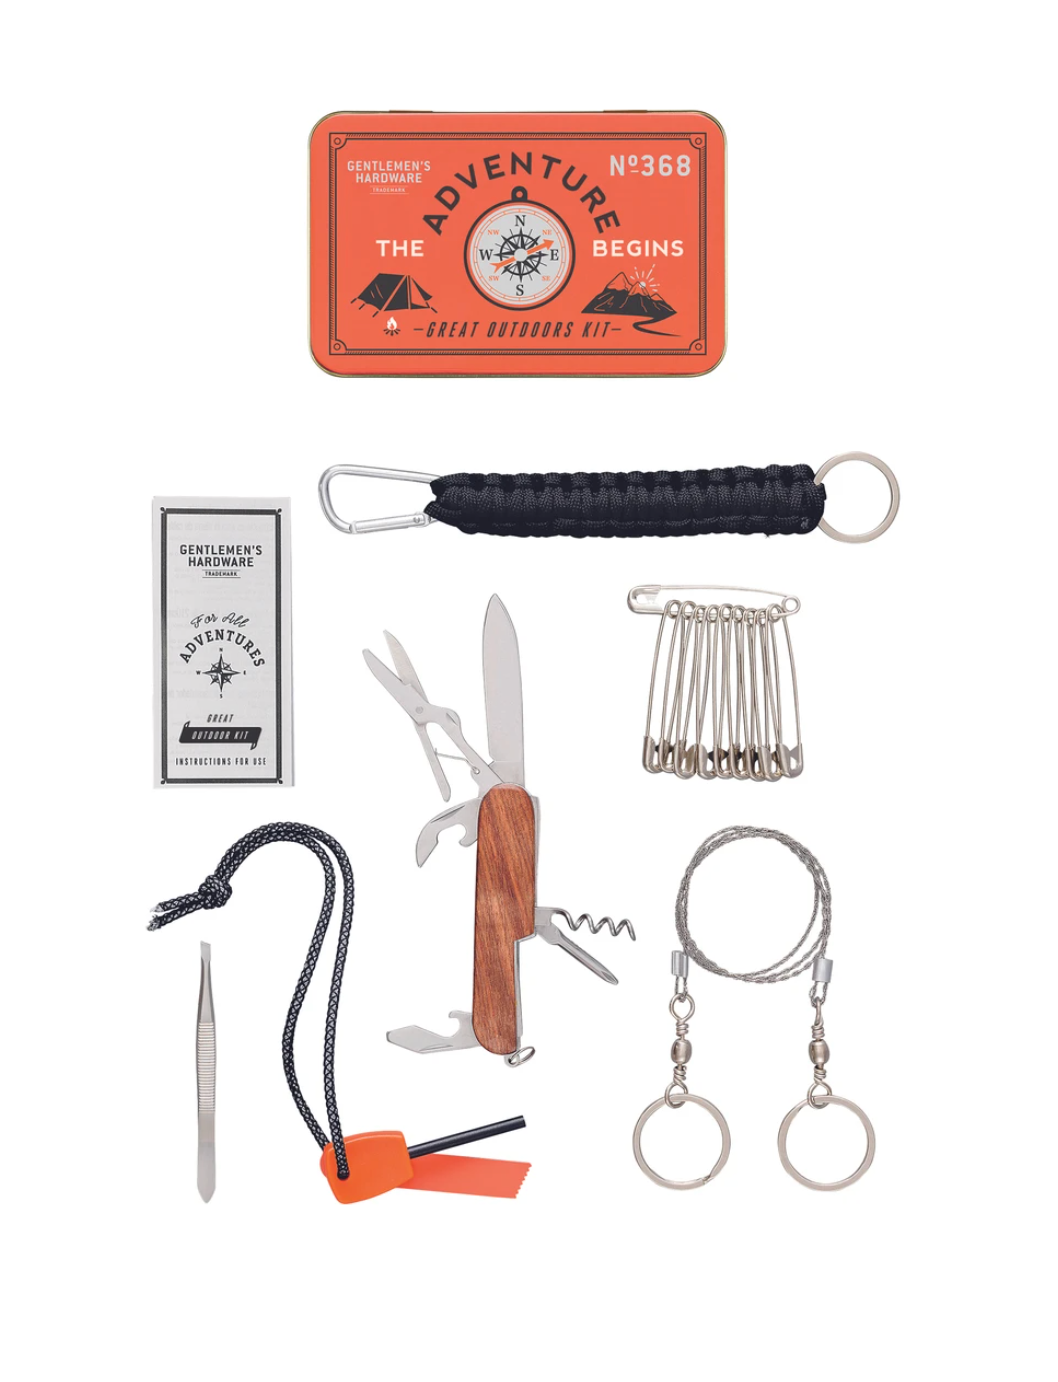 GREAT OUTDOORS KIT